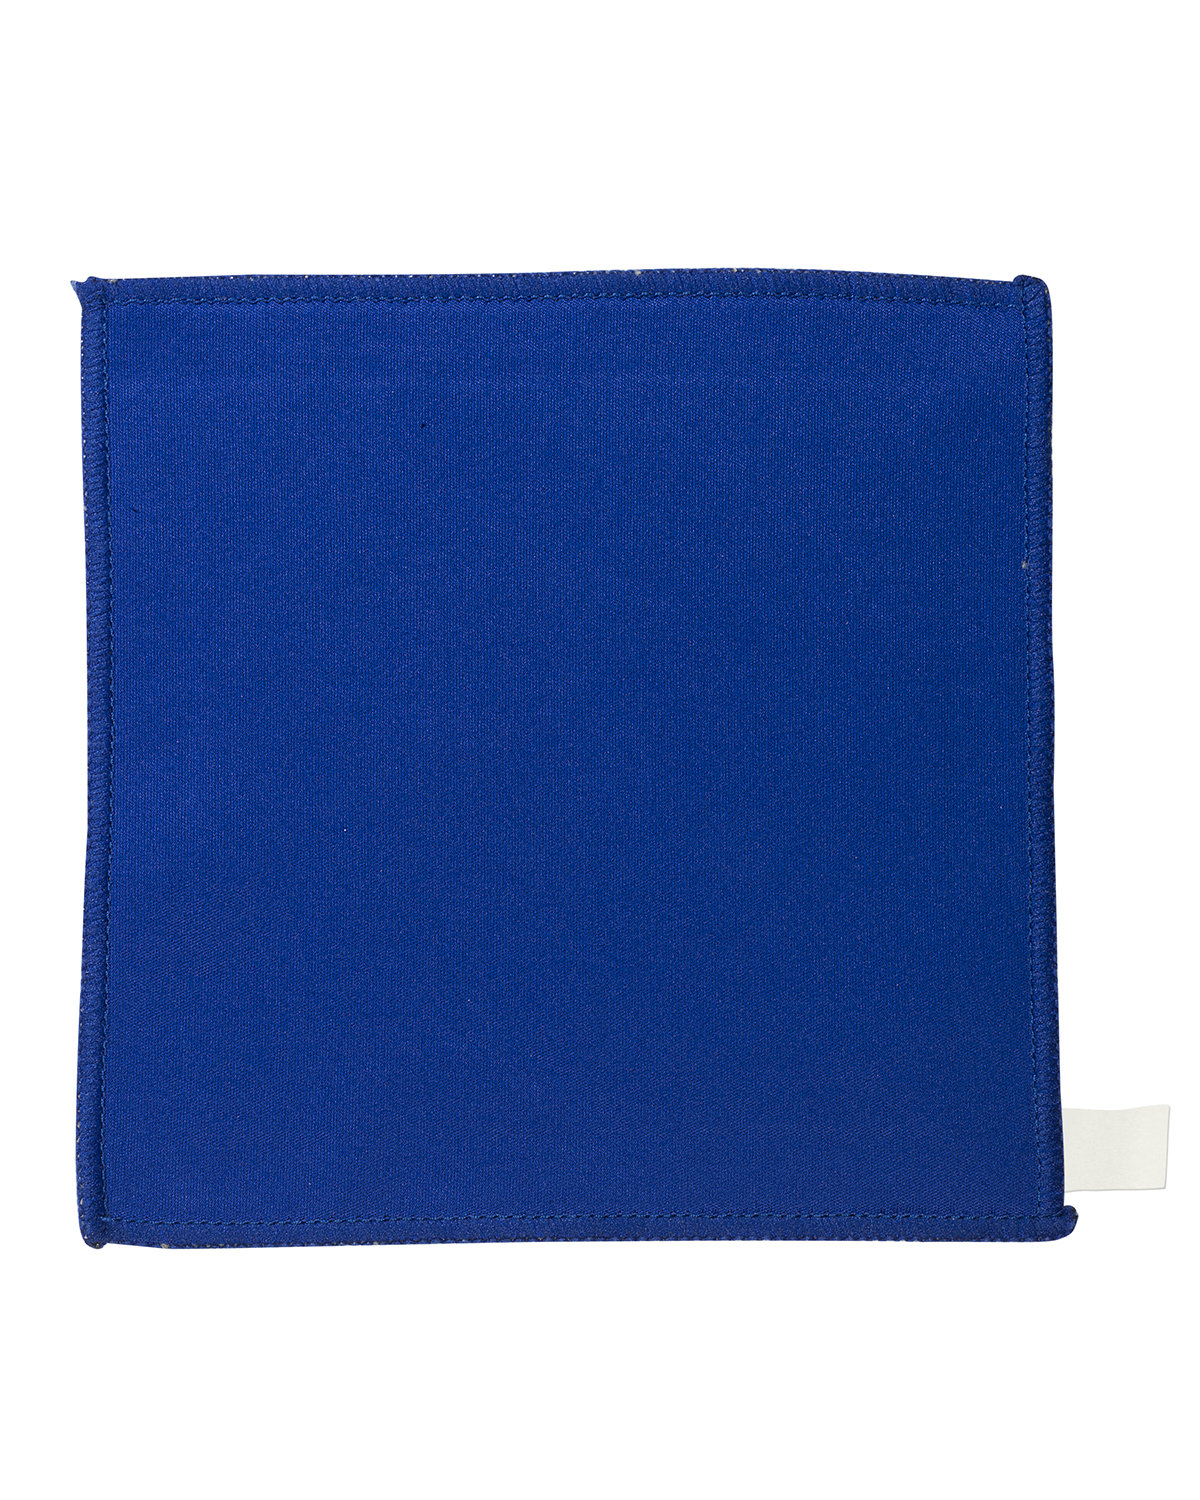 Prime Line Double-Sided Microfiber Cleaning Cloth blue 